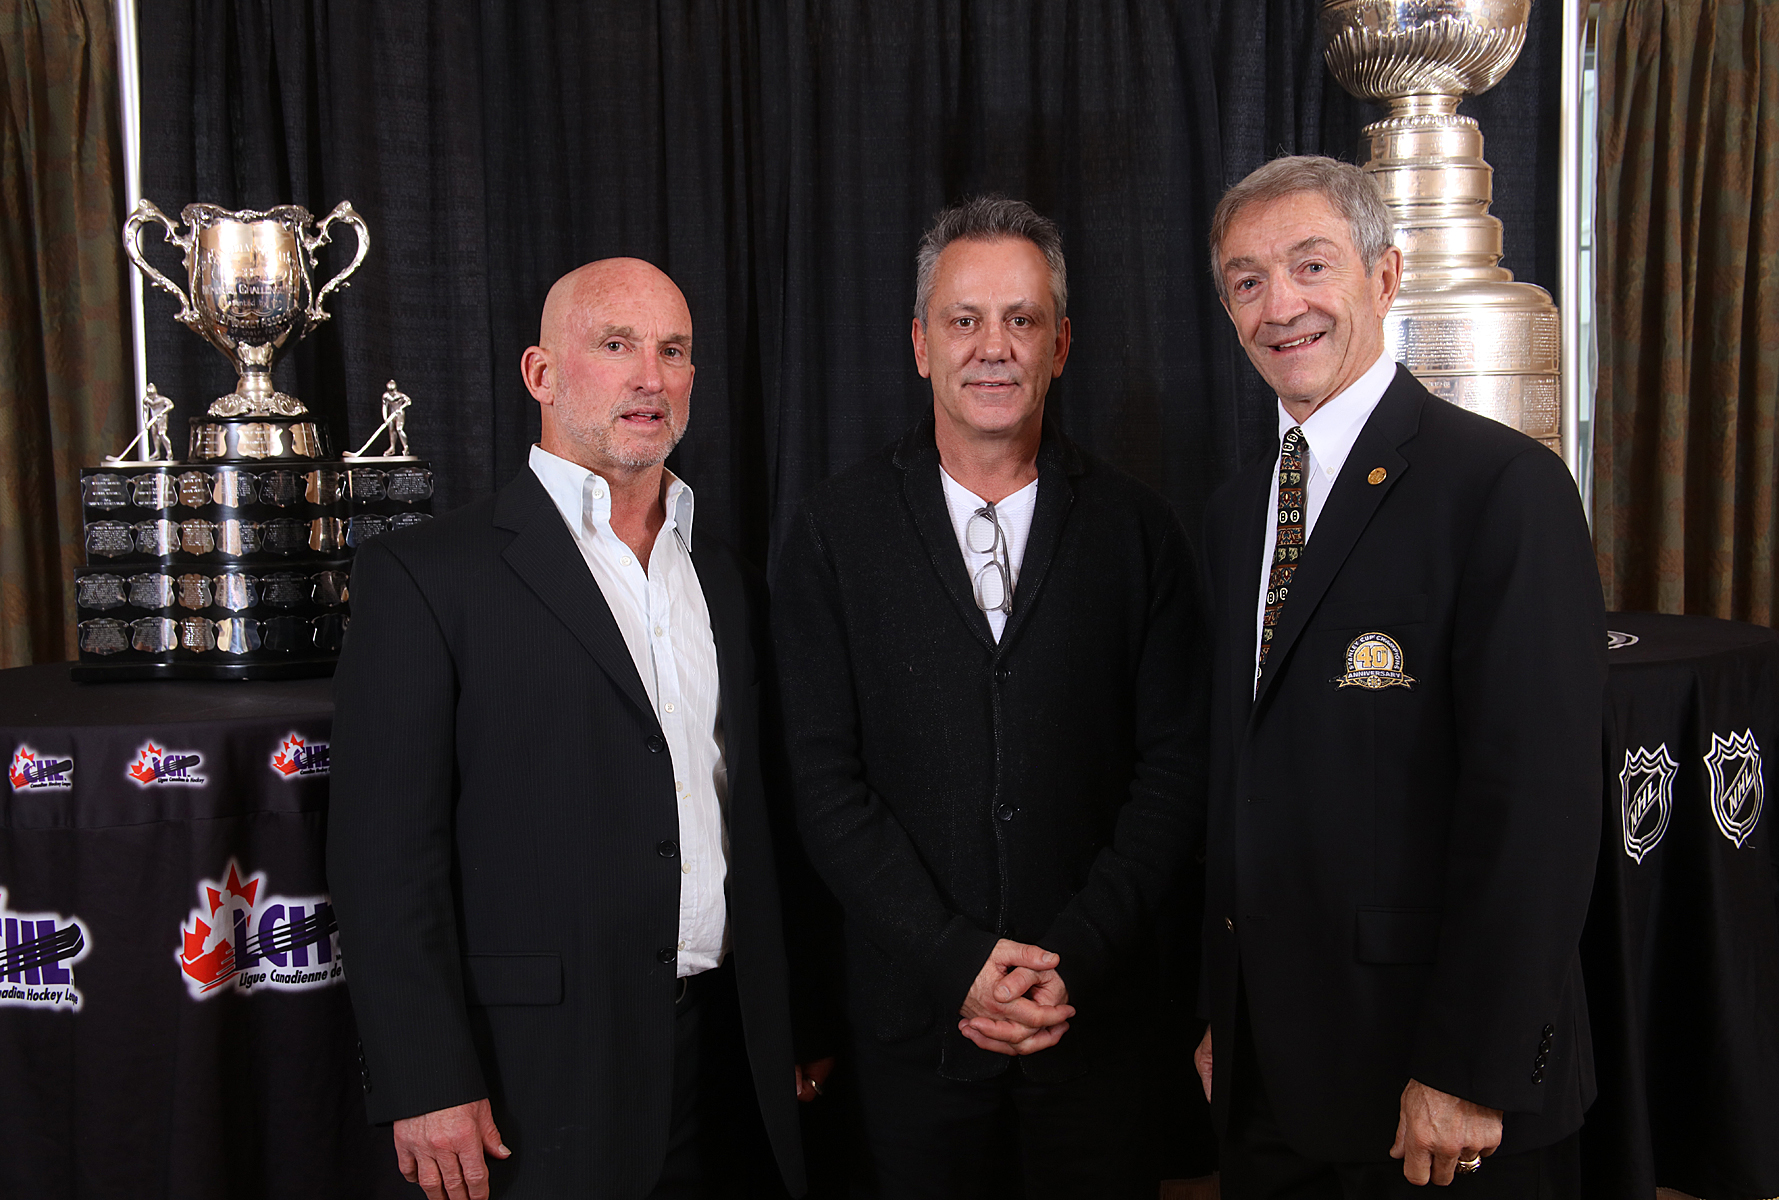 Ken Linseman, Doug Gilmour and Rick Smith celebrate the Hall's 75th anniversary